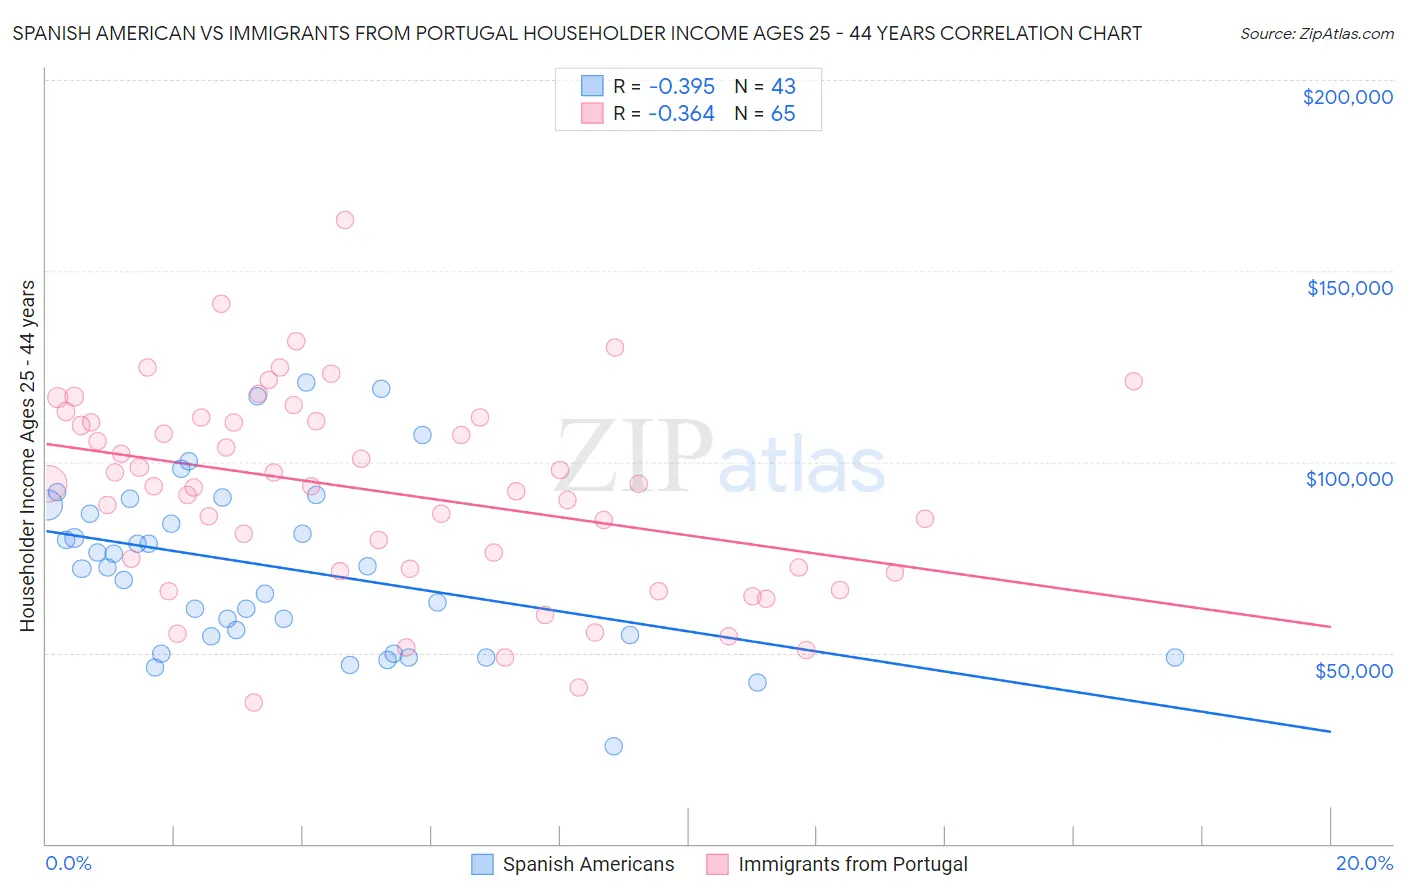 Spanish American vs Immigrants from Portugal Householder Income Ages 25 - 44 years